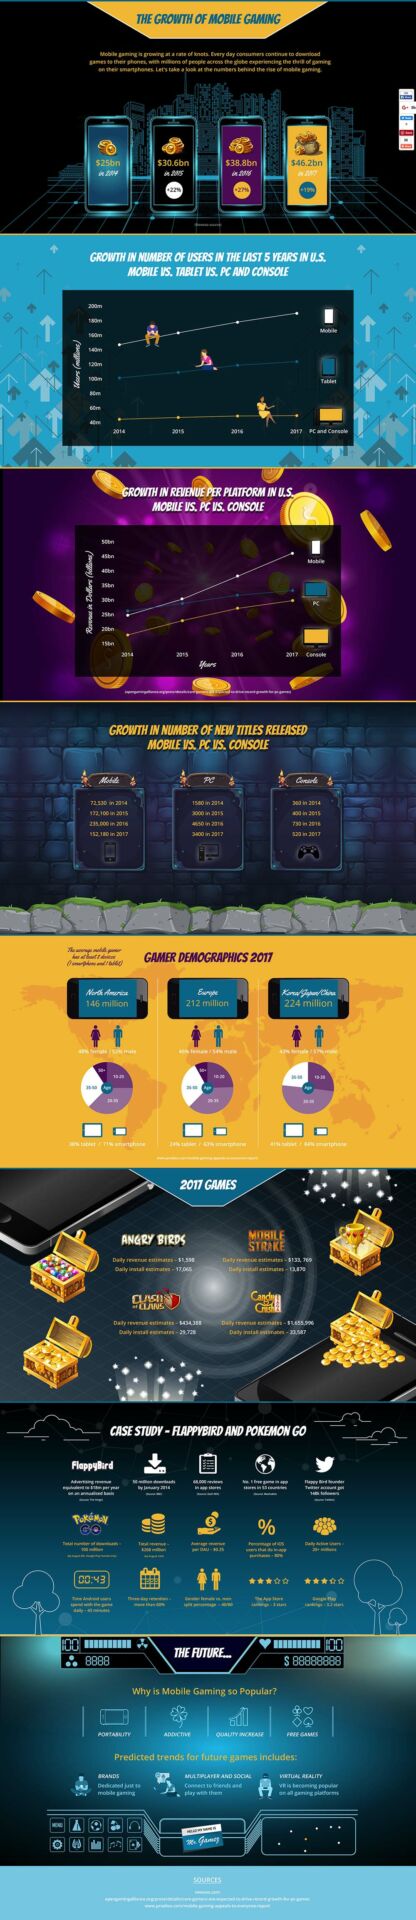 Infographic: Mobile Gaming Growth